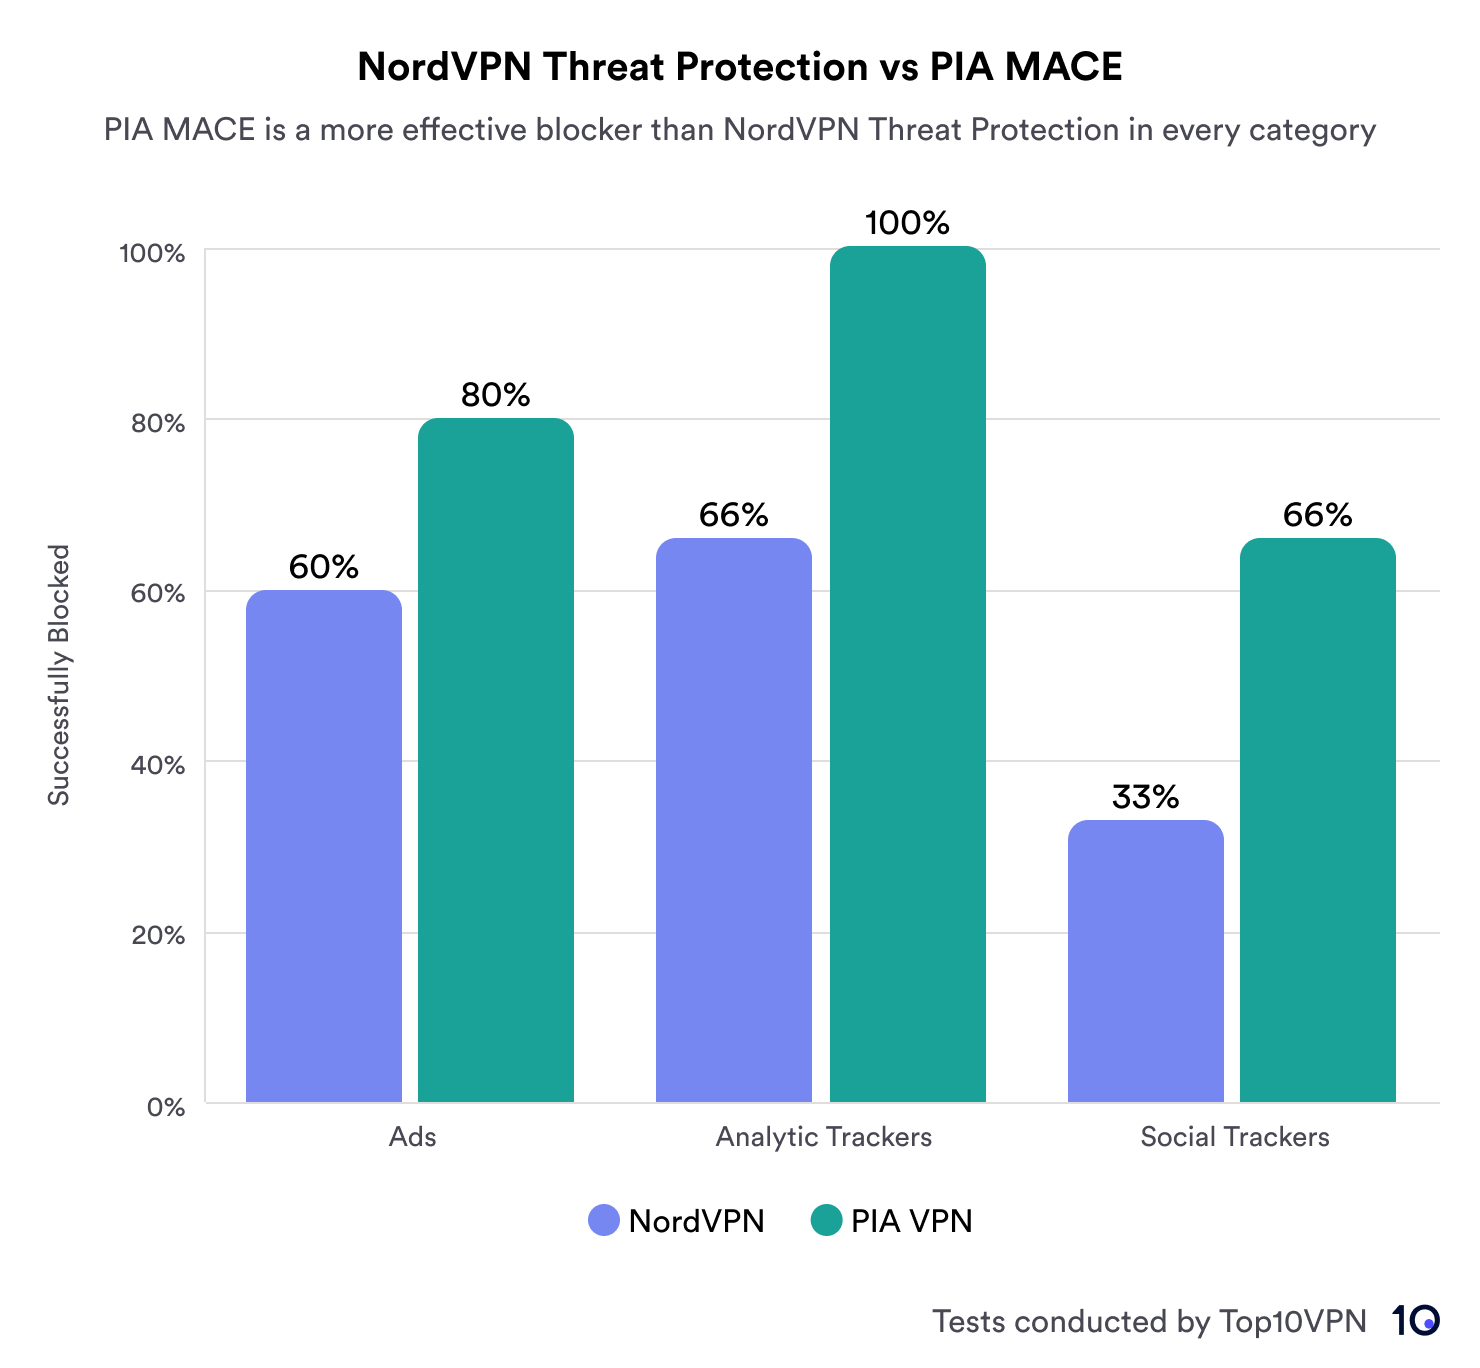 A bar chart comparing NordVPN Threat Protection to PIA MACE in blocking ads, analytic trackers, and social trackers. NordVPN blocks 60% of ads, 66% of analytic trackers, and 33% of social trackers. PIA MACE outperforms with 80% of ads, 100% of analytic trackers, and 66% of social trackers blocked.